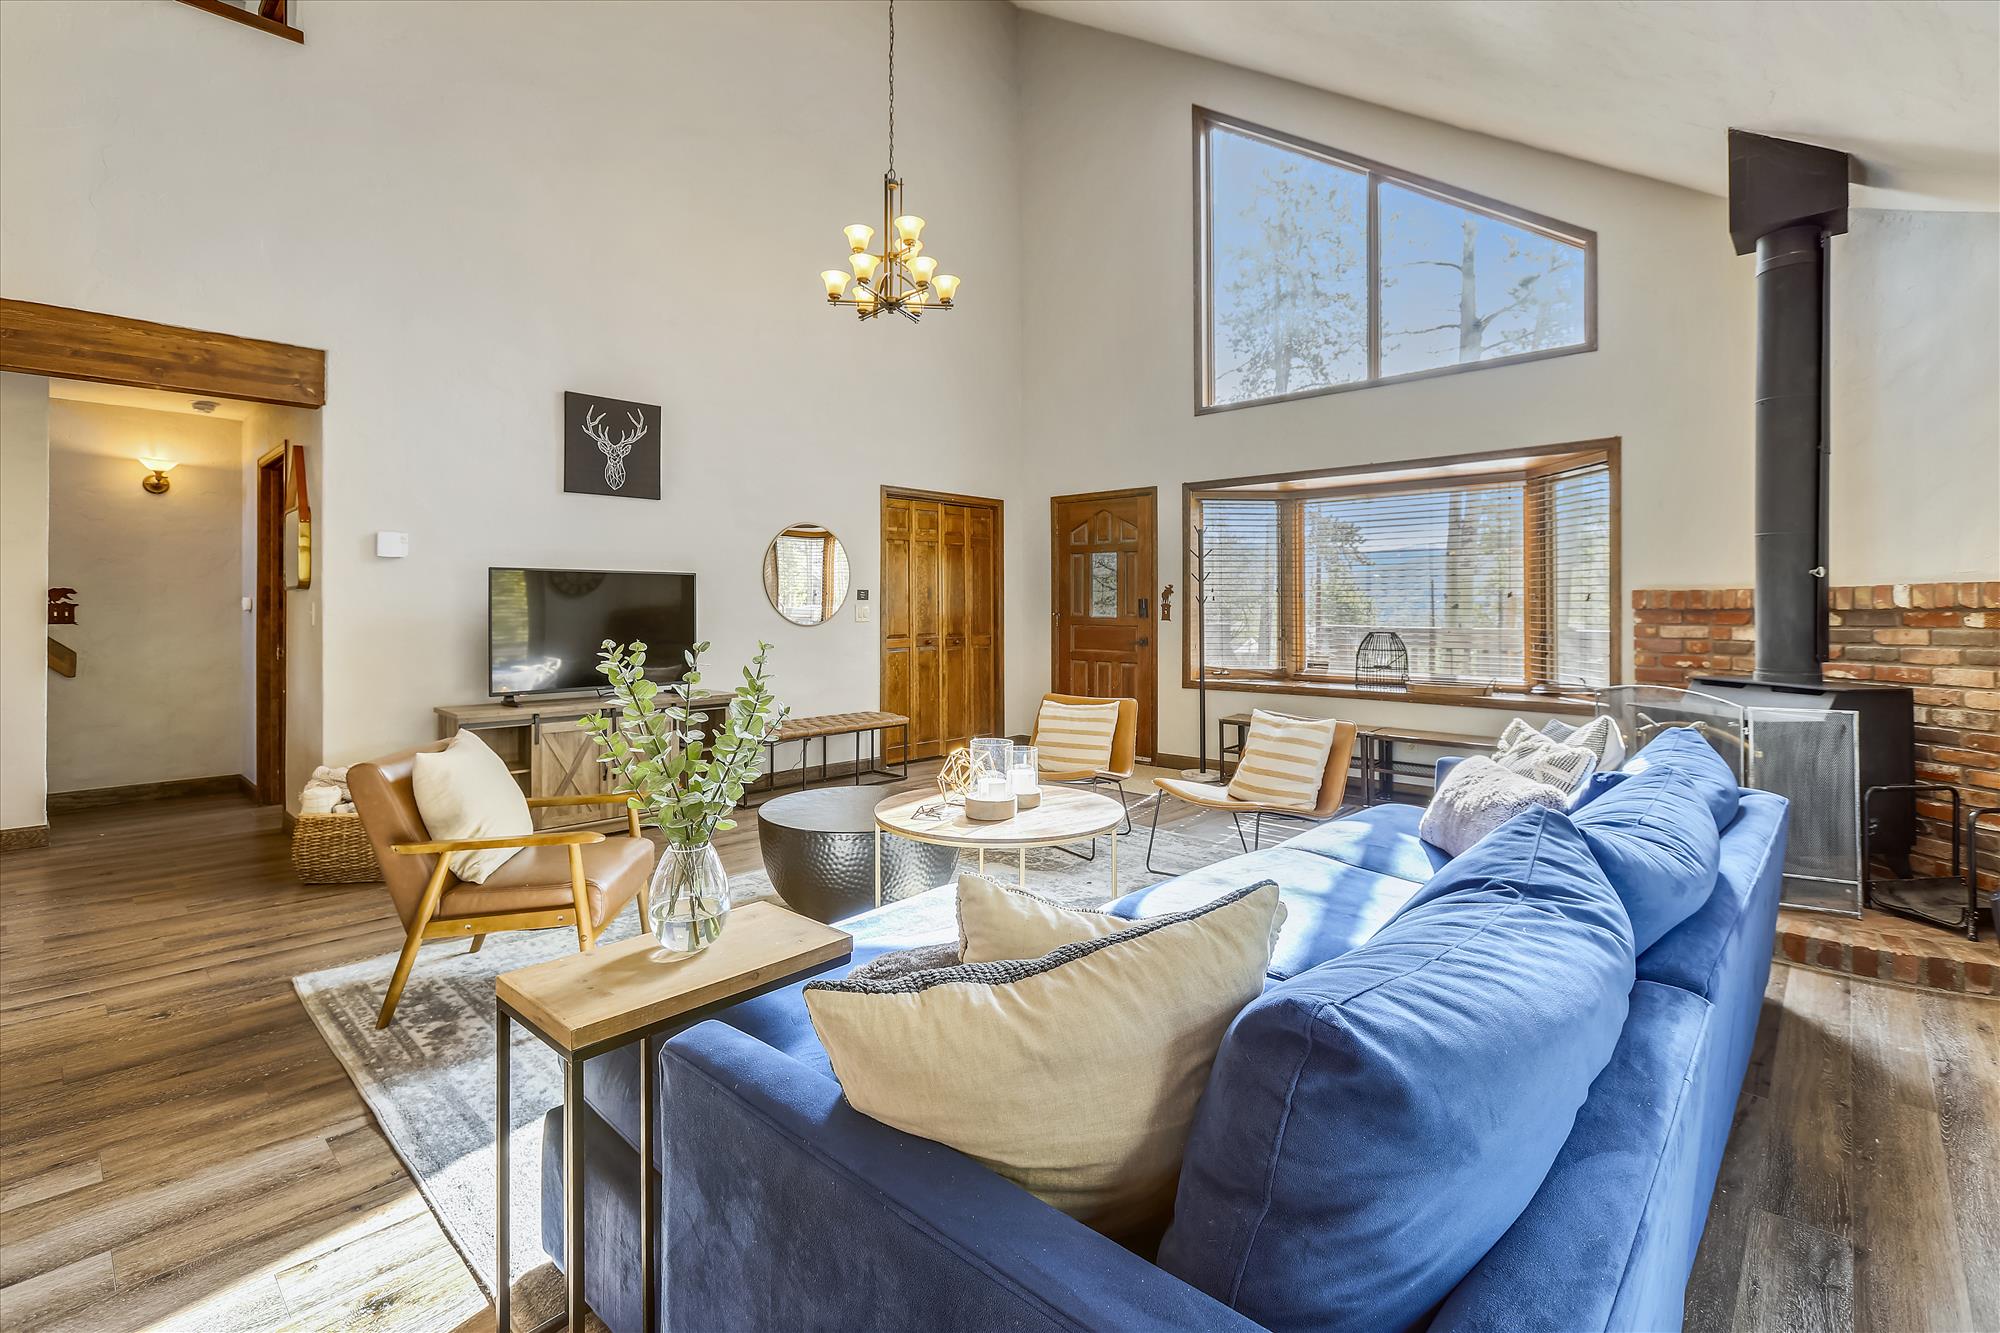 Large and spacious living room to host your whole group comfortably - Calderon De La Breck Breckenridge Vacation Rental